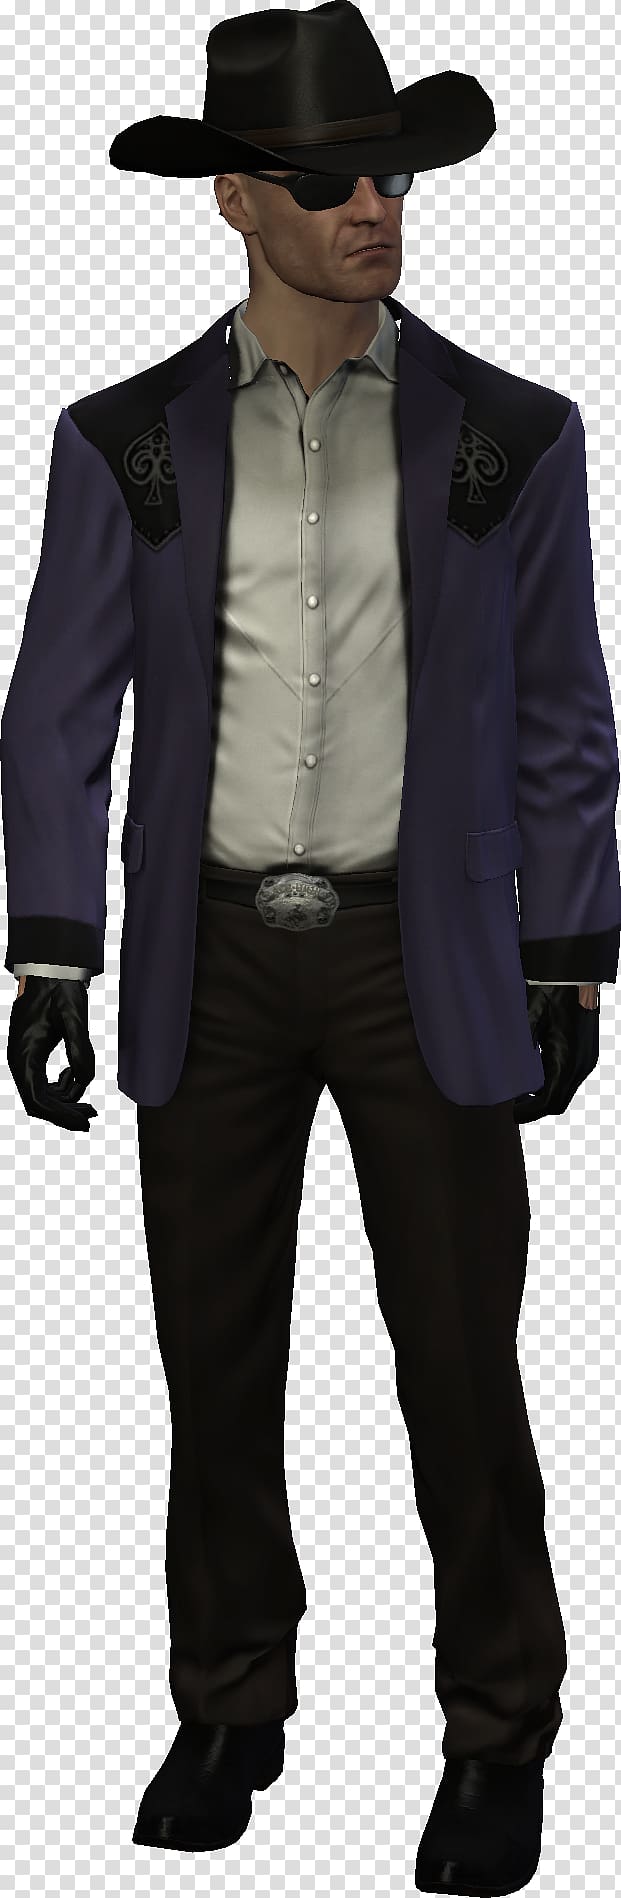 Hitman: Absolution Agent 47 Wikia, Hitman transparent background PNG clipart